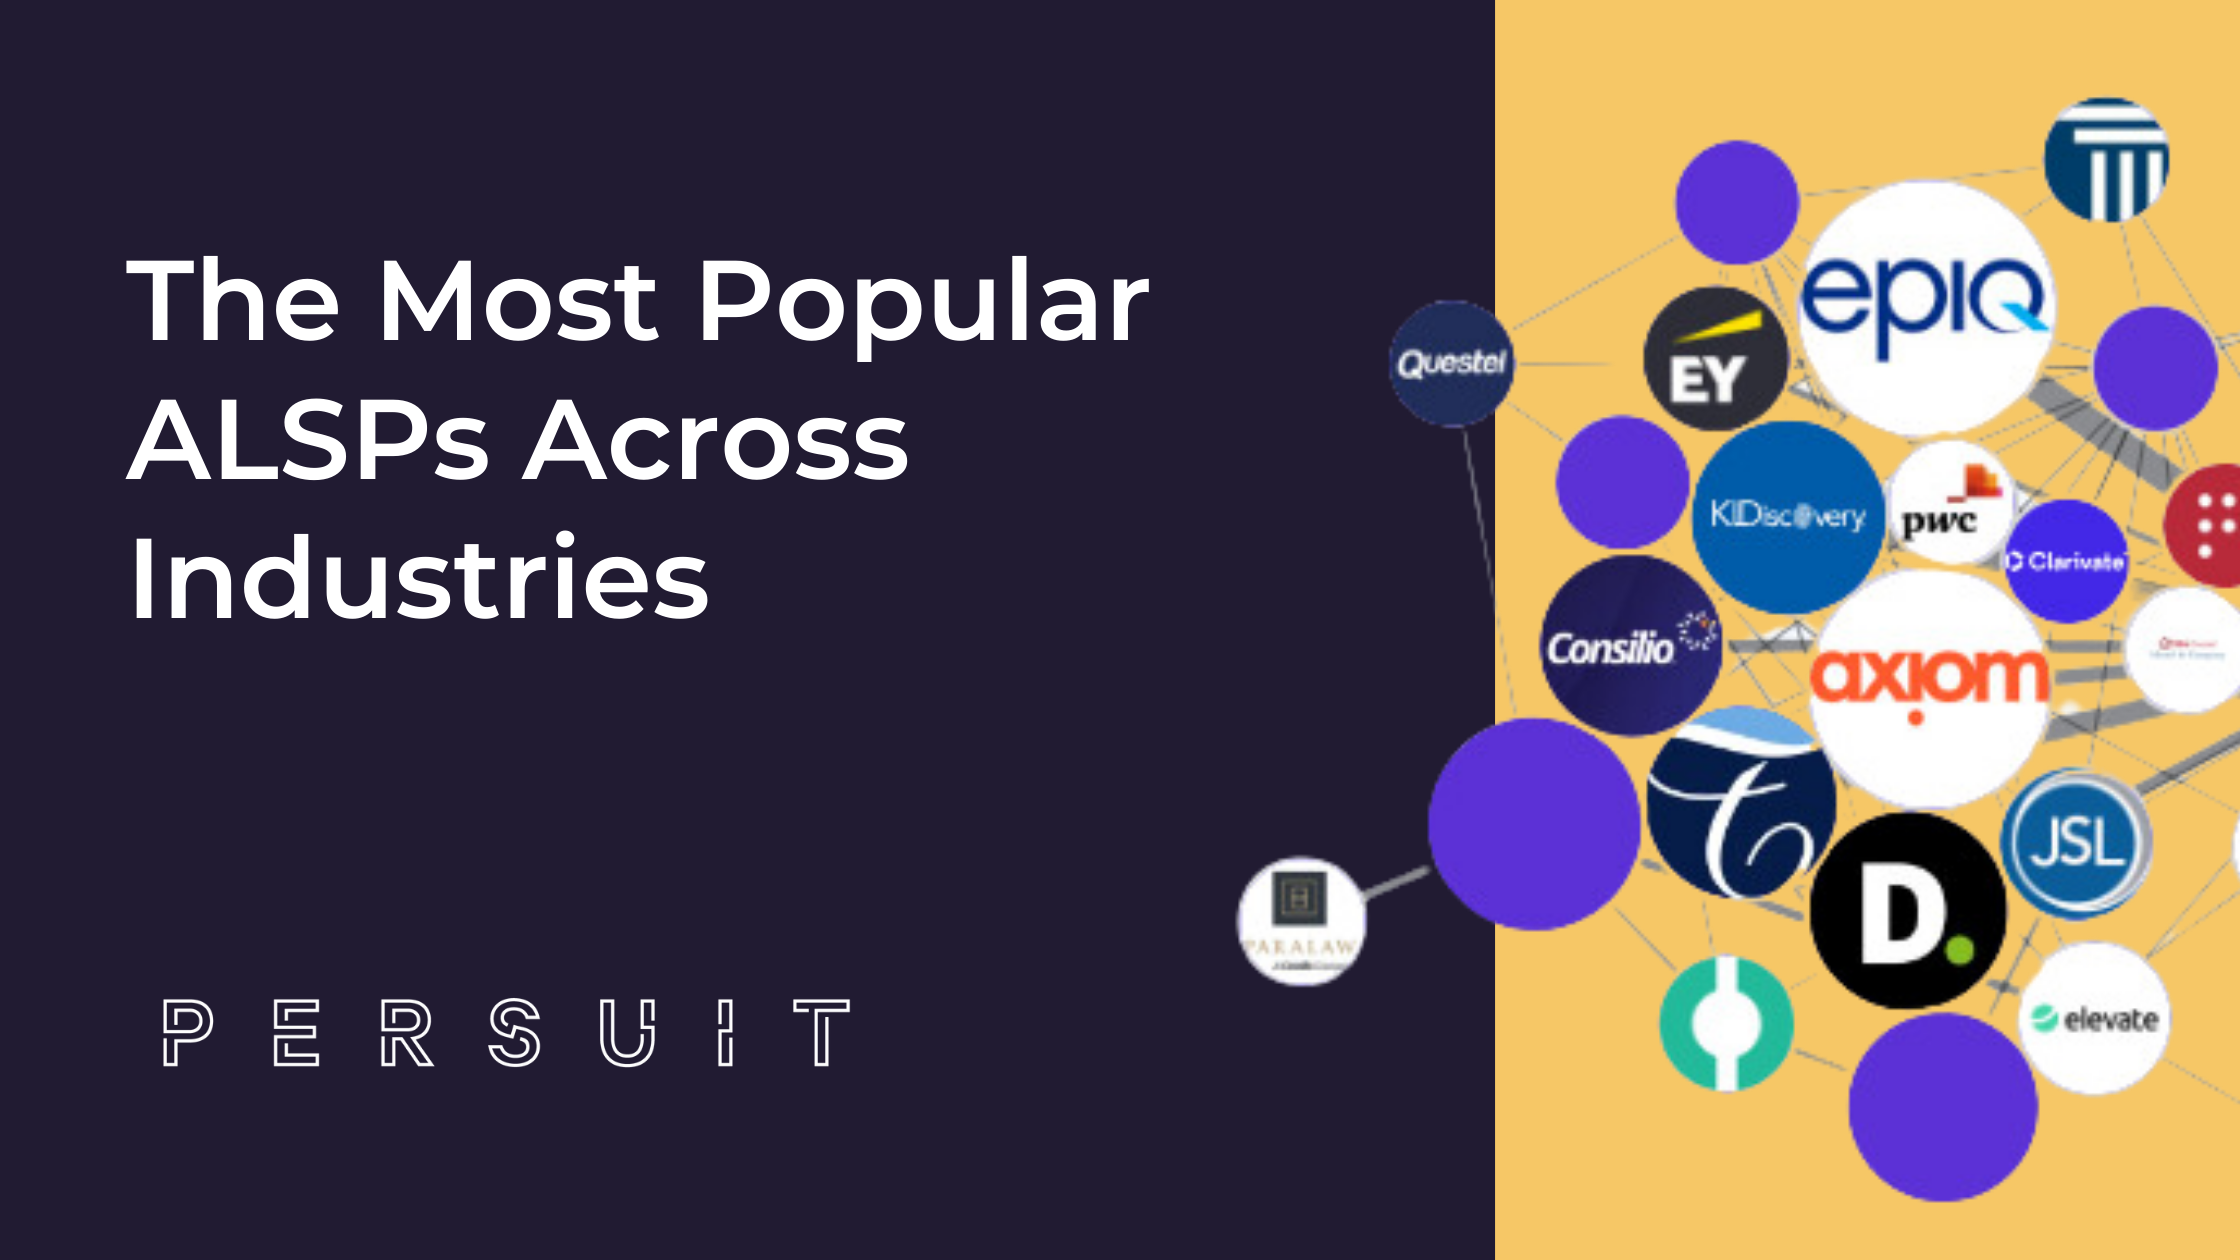 What Are the Most Popular ALSPs on PERSUIT by Industry?